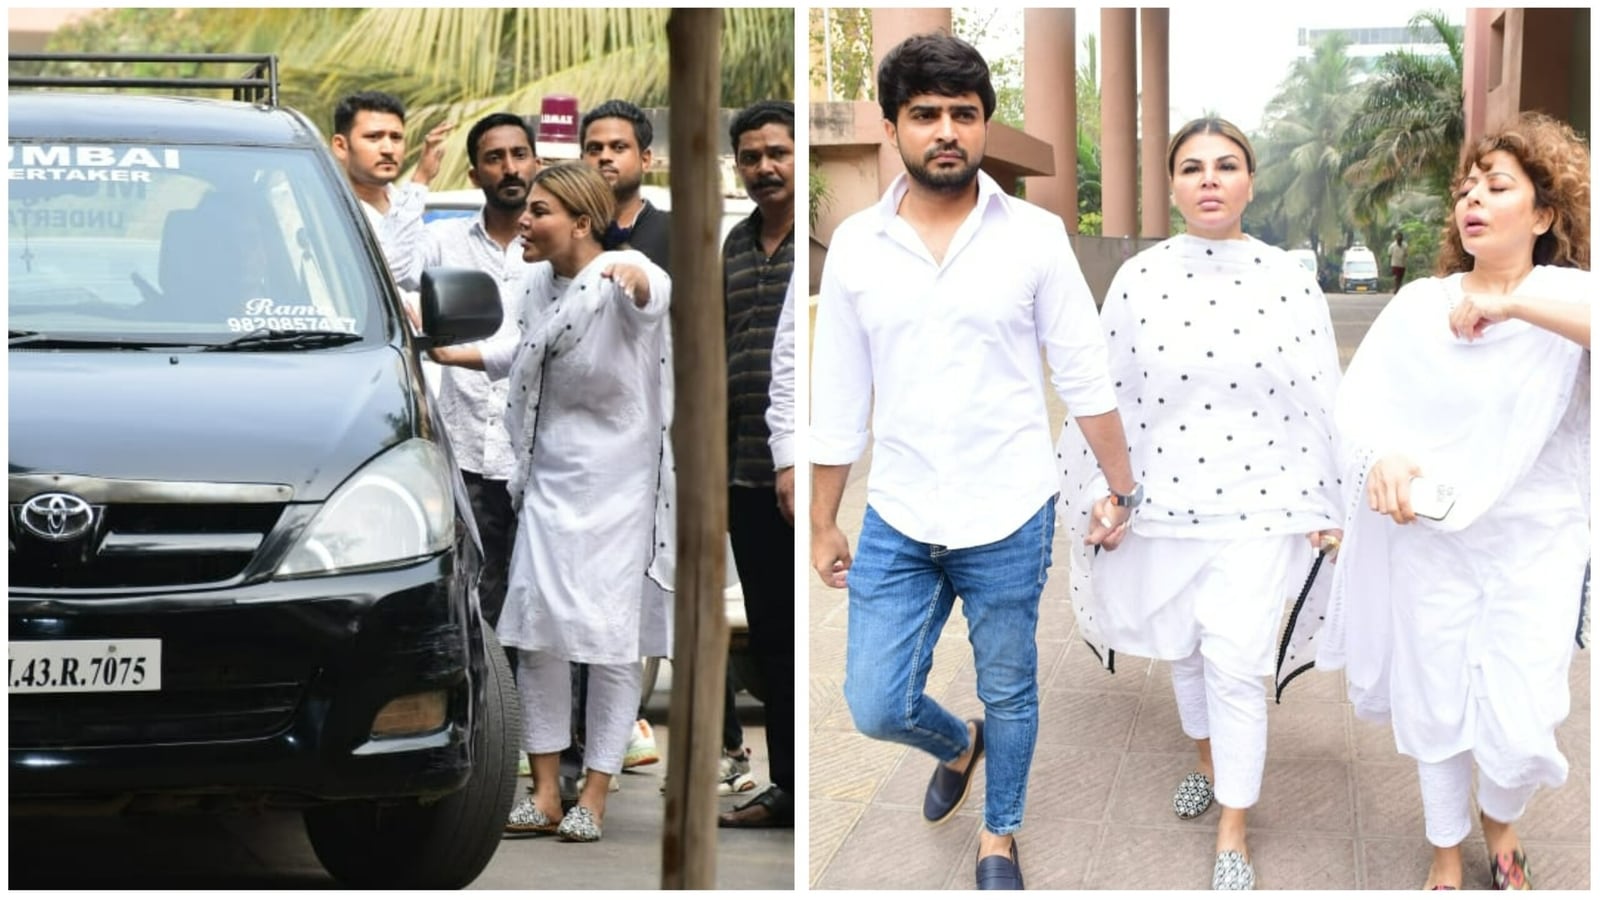 Rakhi Sawant’s husband Adil Khan Durrani remains by her side during her mom’s last rites, Rashami Desai also joins them